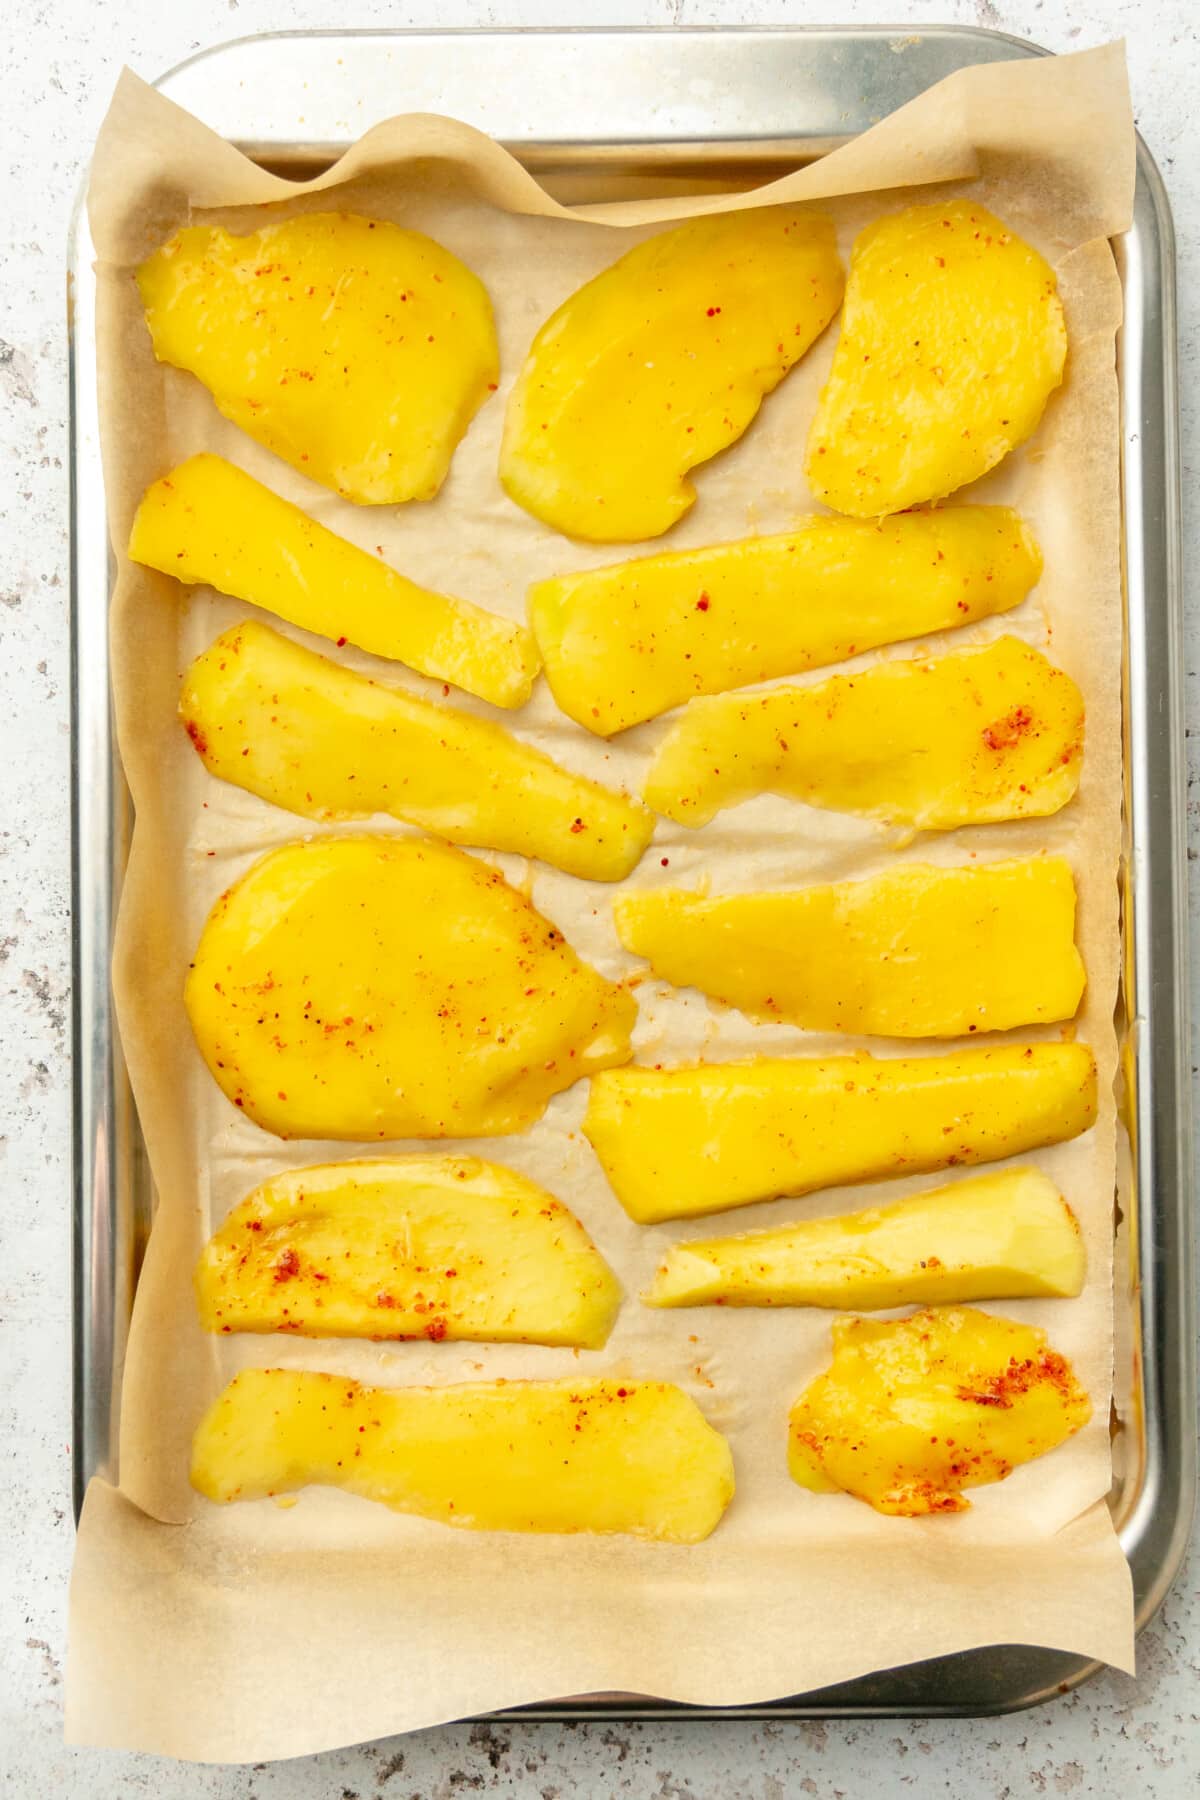 Slices of chili coated mango sit on a lined baking tray on a light grey colored surface.